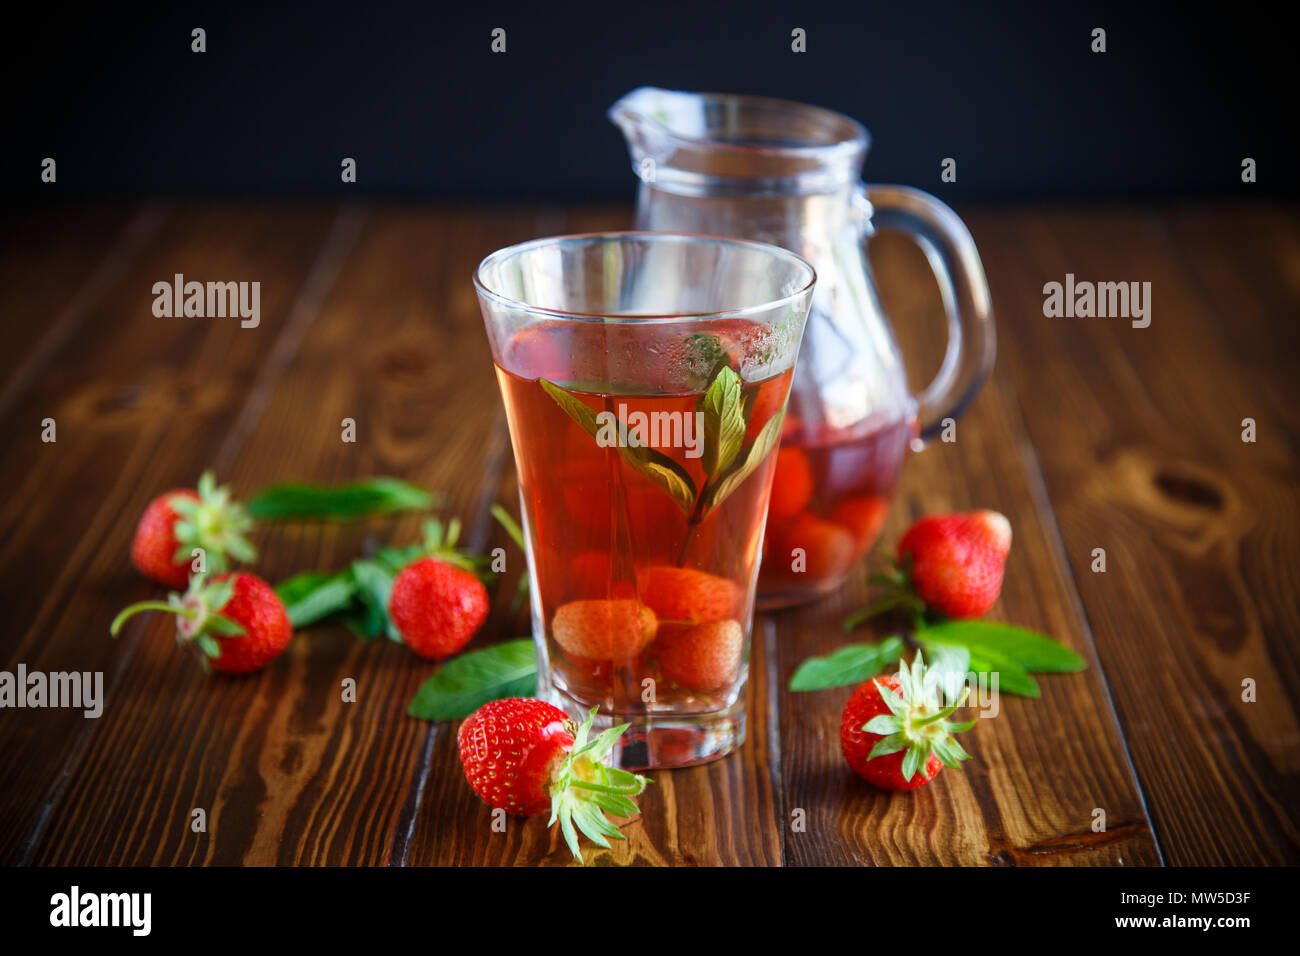 Sweet compote of ripe red strawberries in a glass decanter on a table Stock Photo